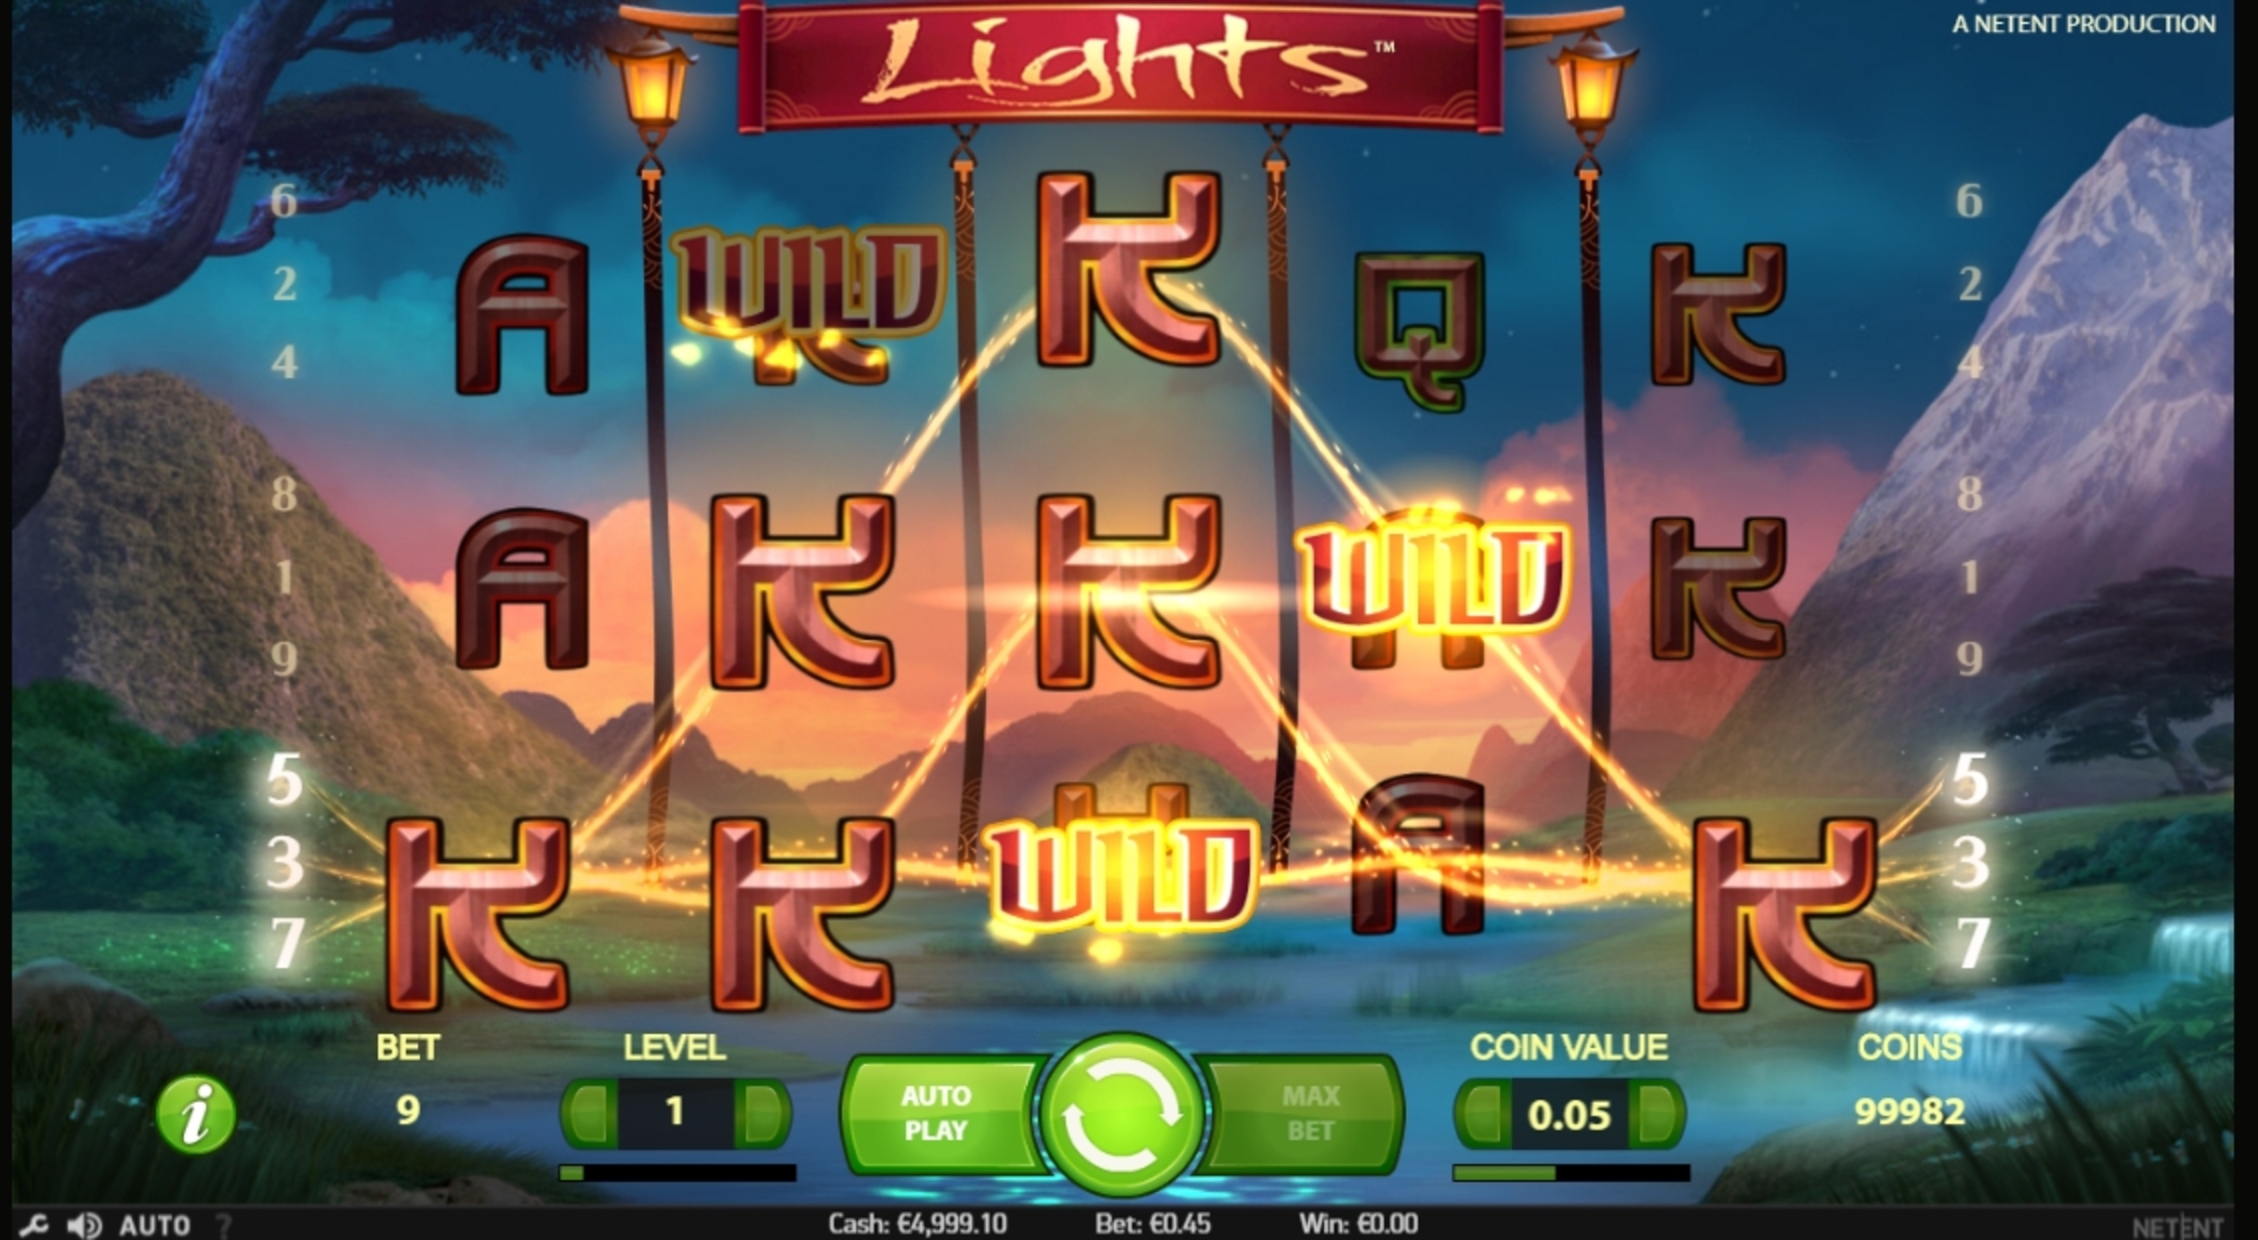 Win Money in Lights Free Slot Game by NetEnt